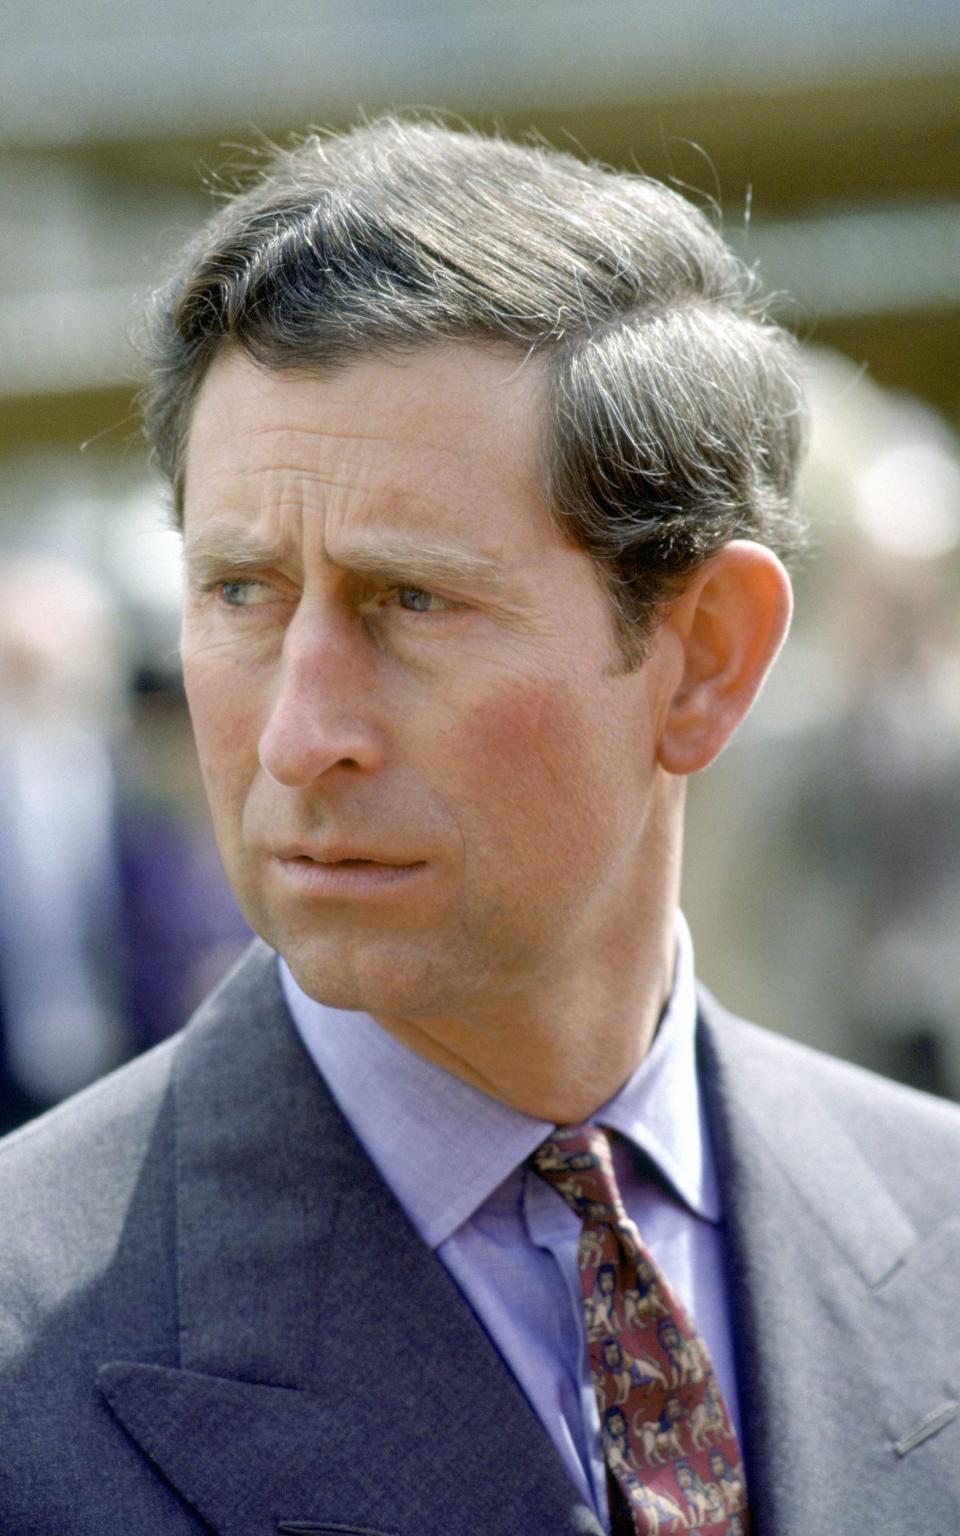 Prince Charles wearing a tie with a lion pattern in 1992